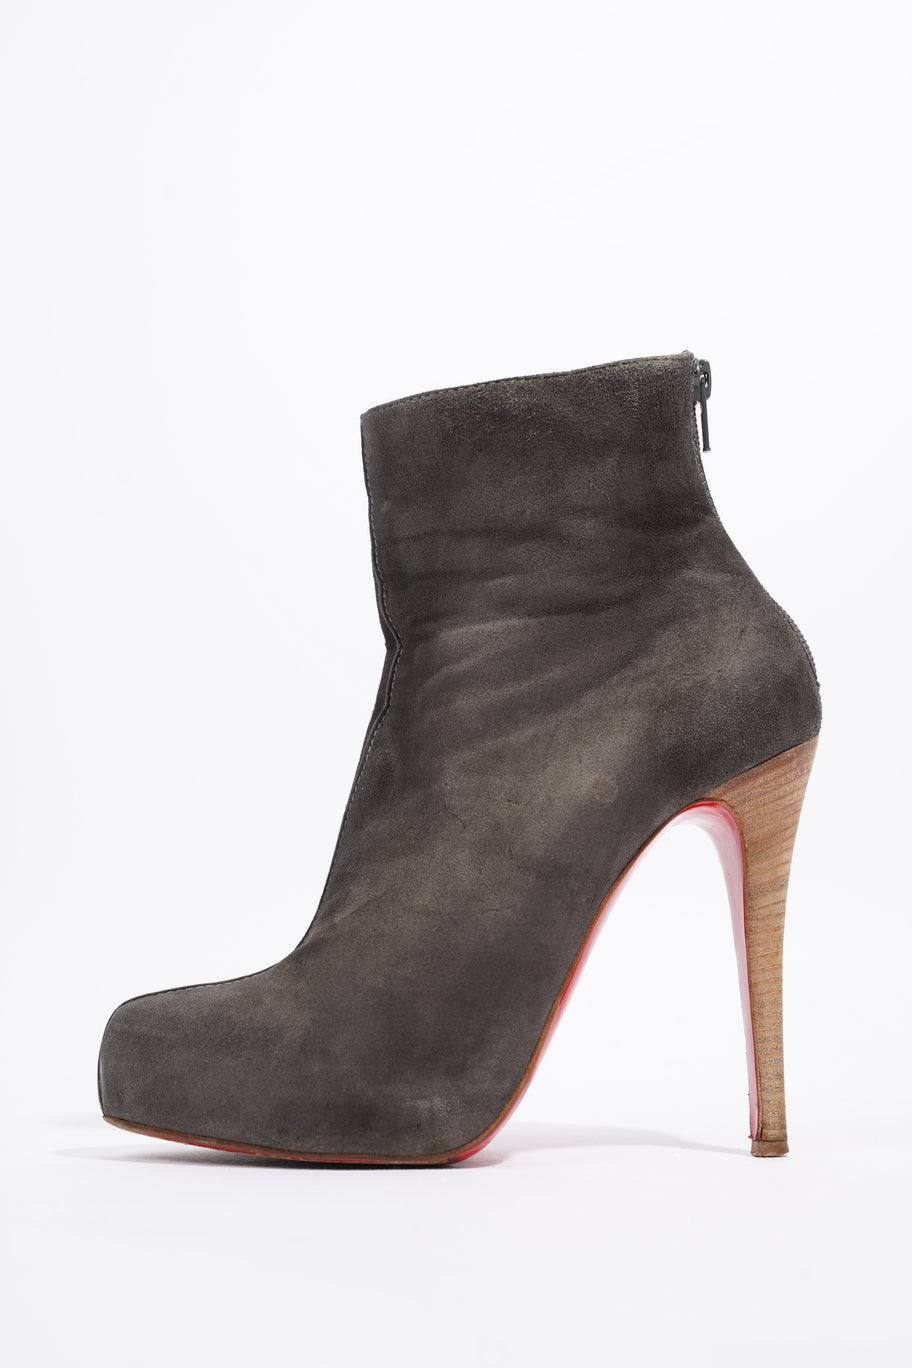 Ankle Boot Grey Suede EU 38 UK 5 Image 5